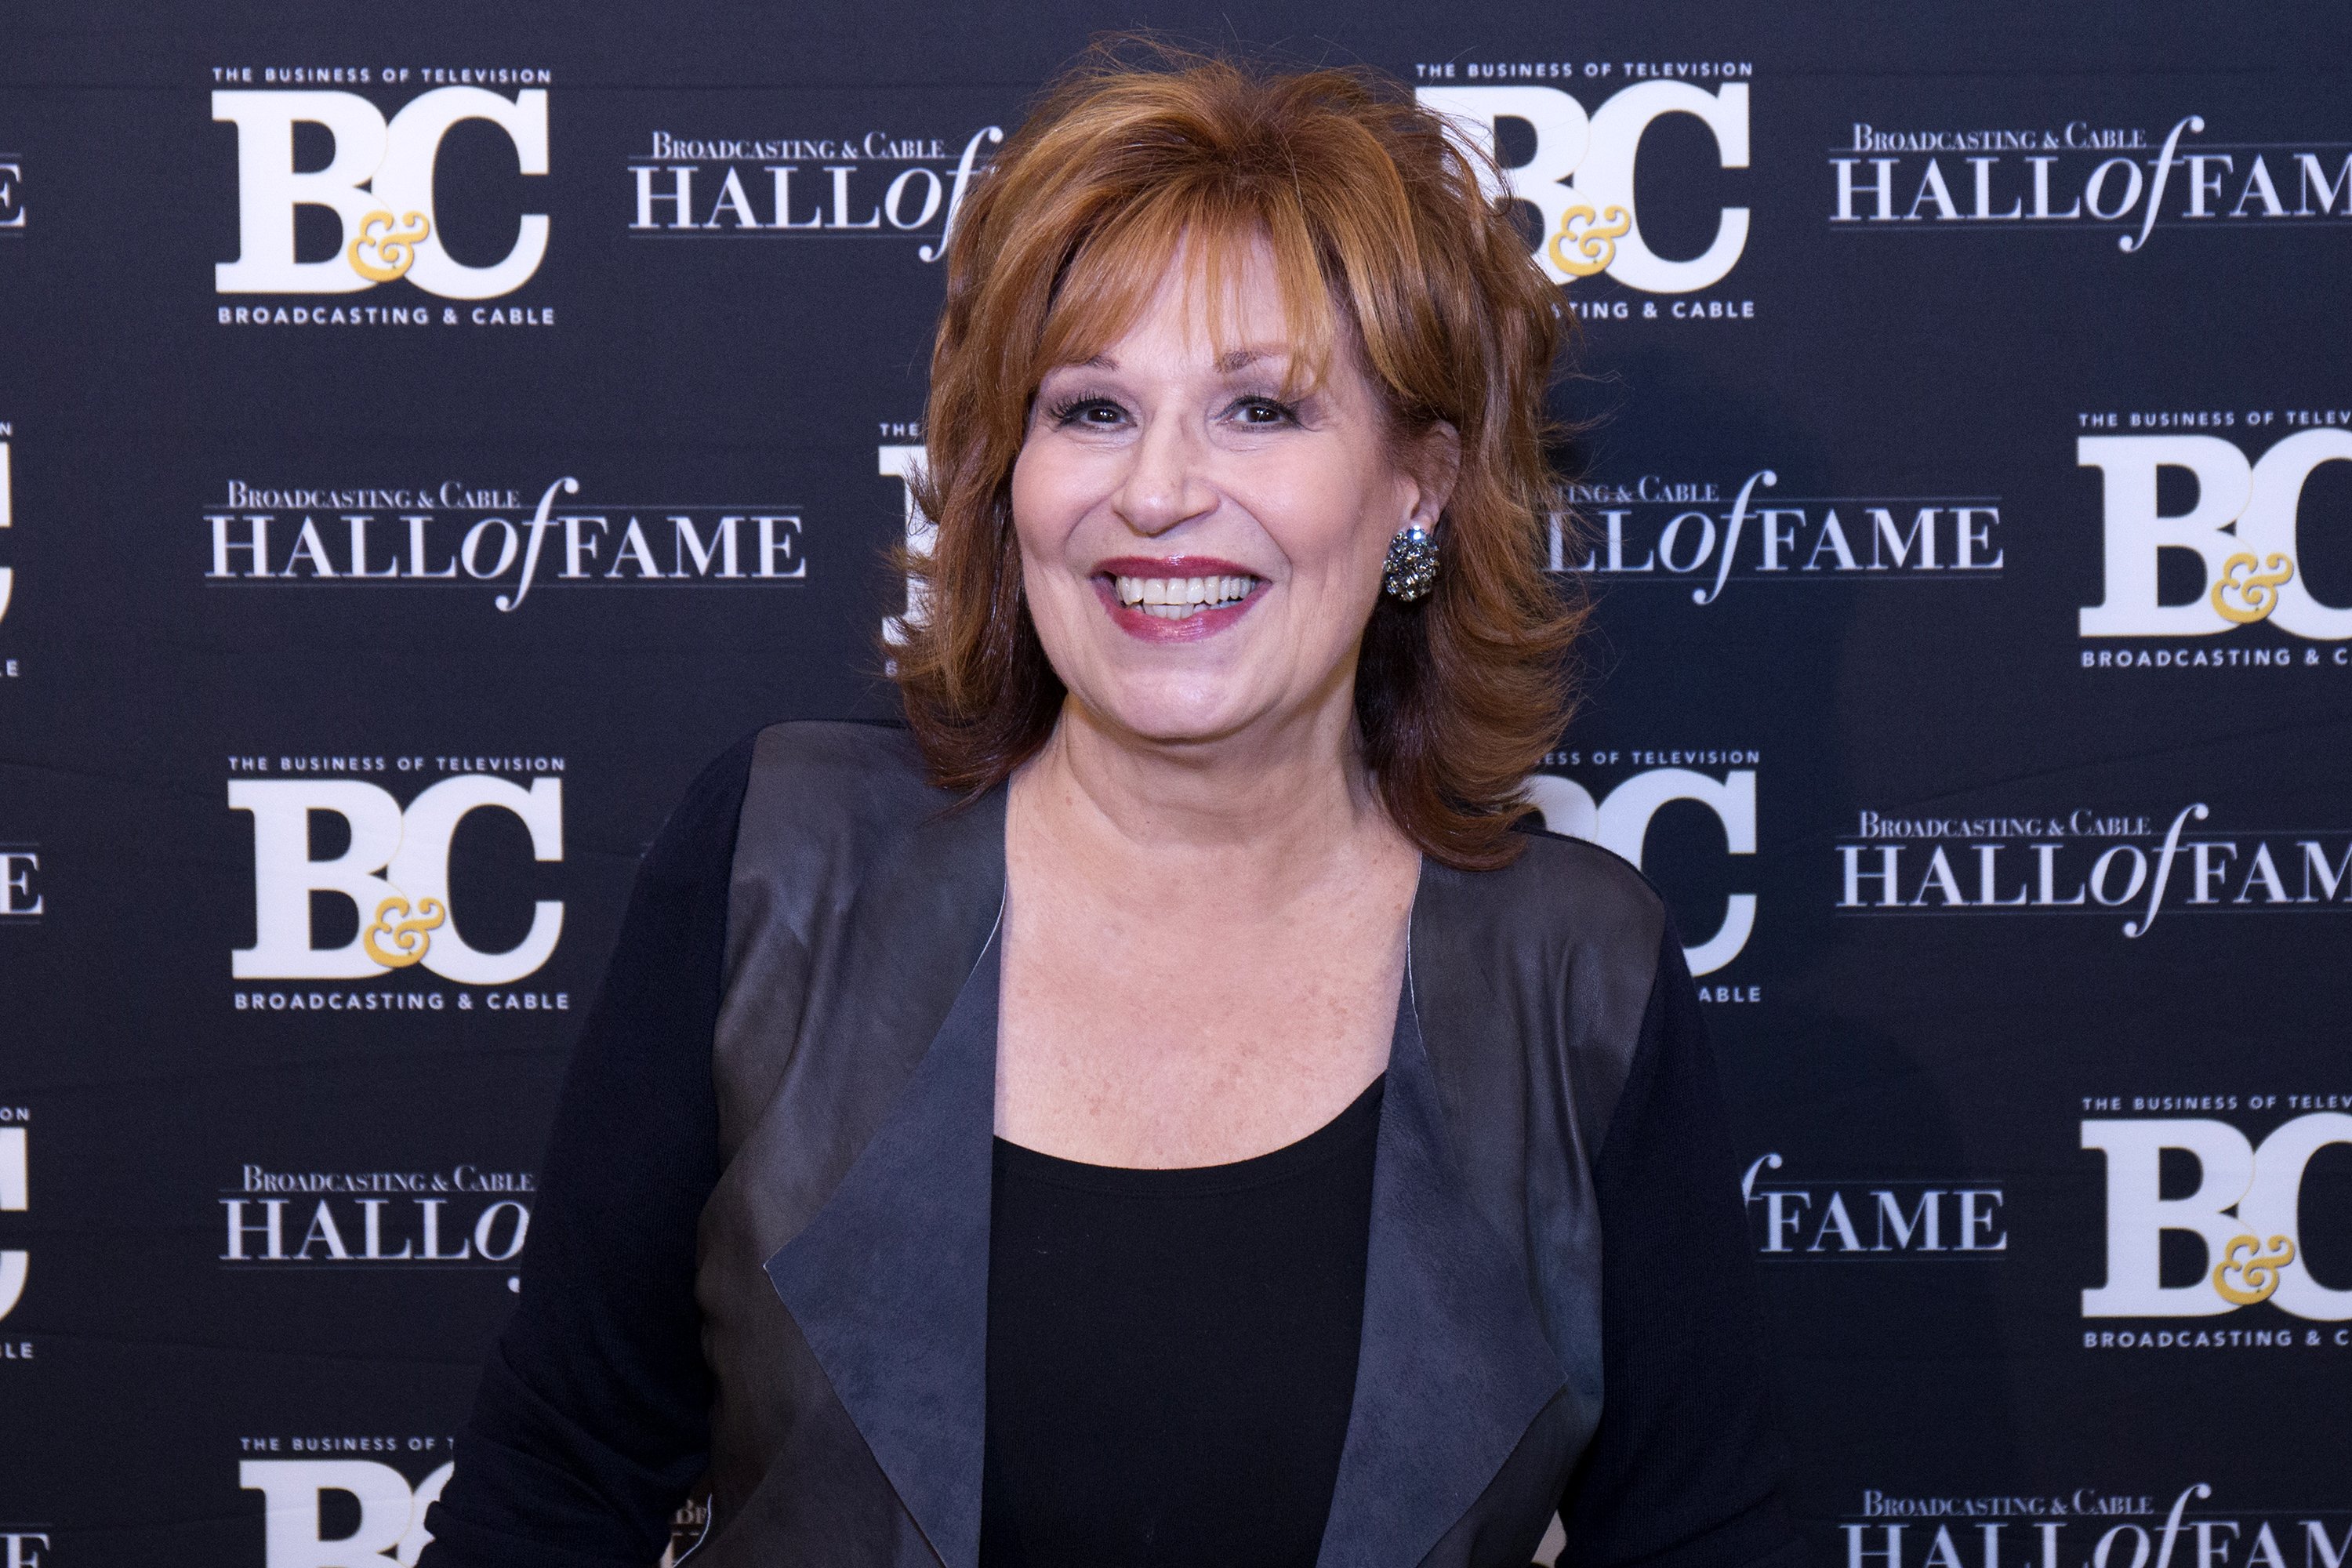 Joy Behar attends the 2017 Broadcasting & Cable Hall Of Fame 27th Anniversary Gala at Grand Hyatt New York on October 16, 2017 in New York City. | Source: Getty Images